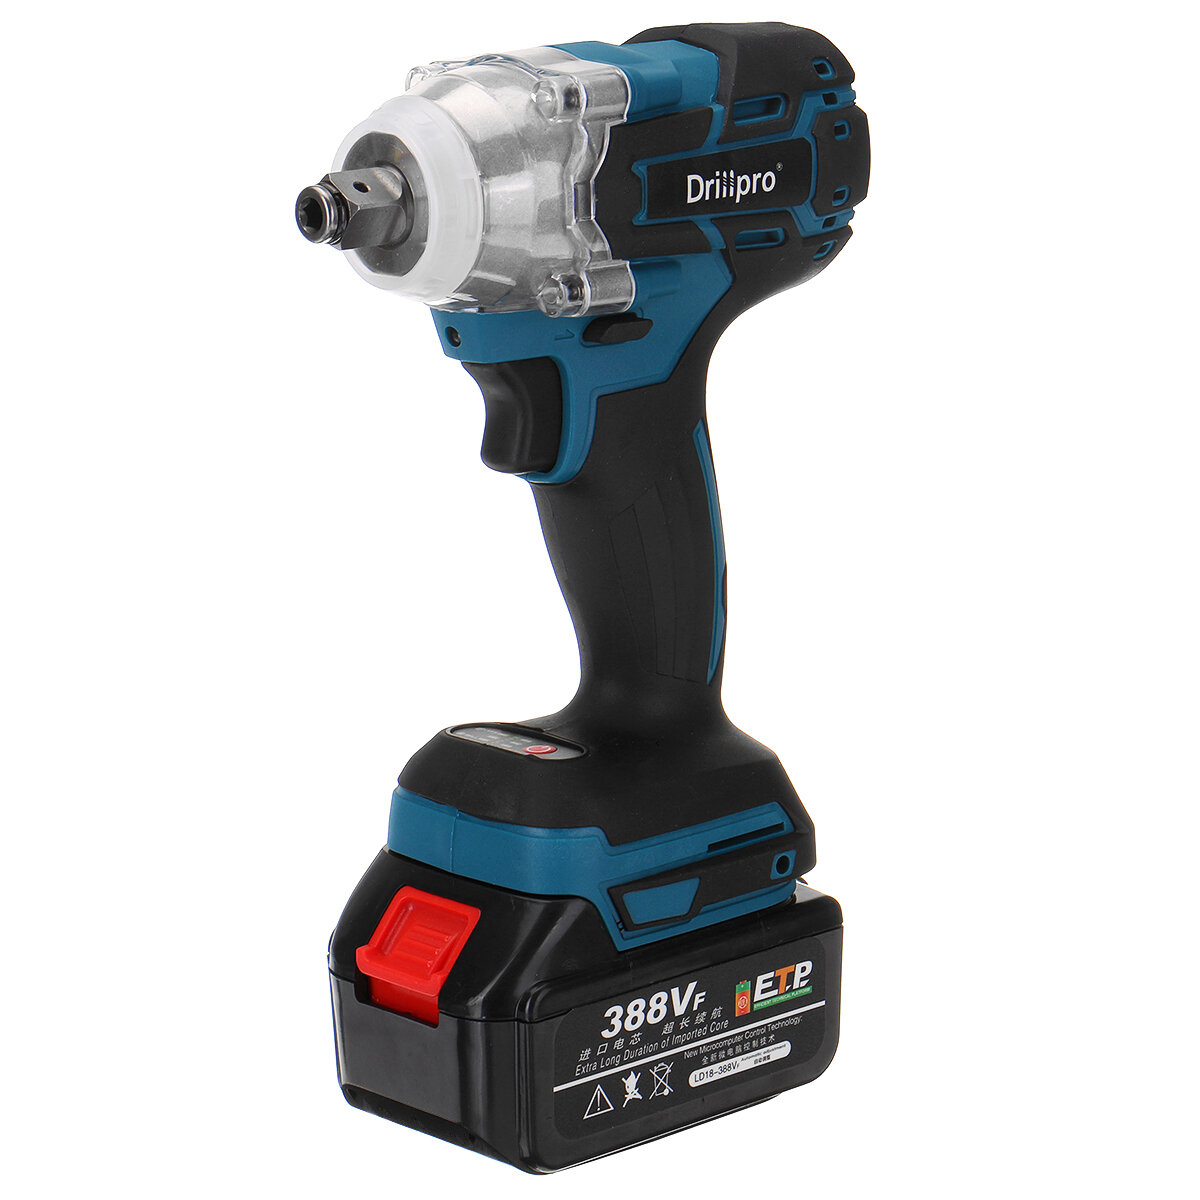 Drillpro 388VF 520N.m Brushless Electric Cordless Impact Wrench 1/2 inch Drill Driver...